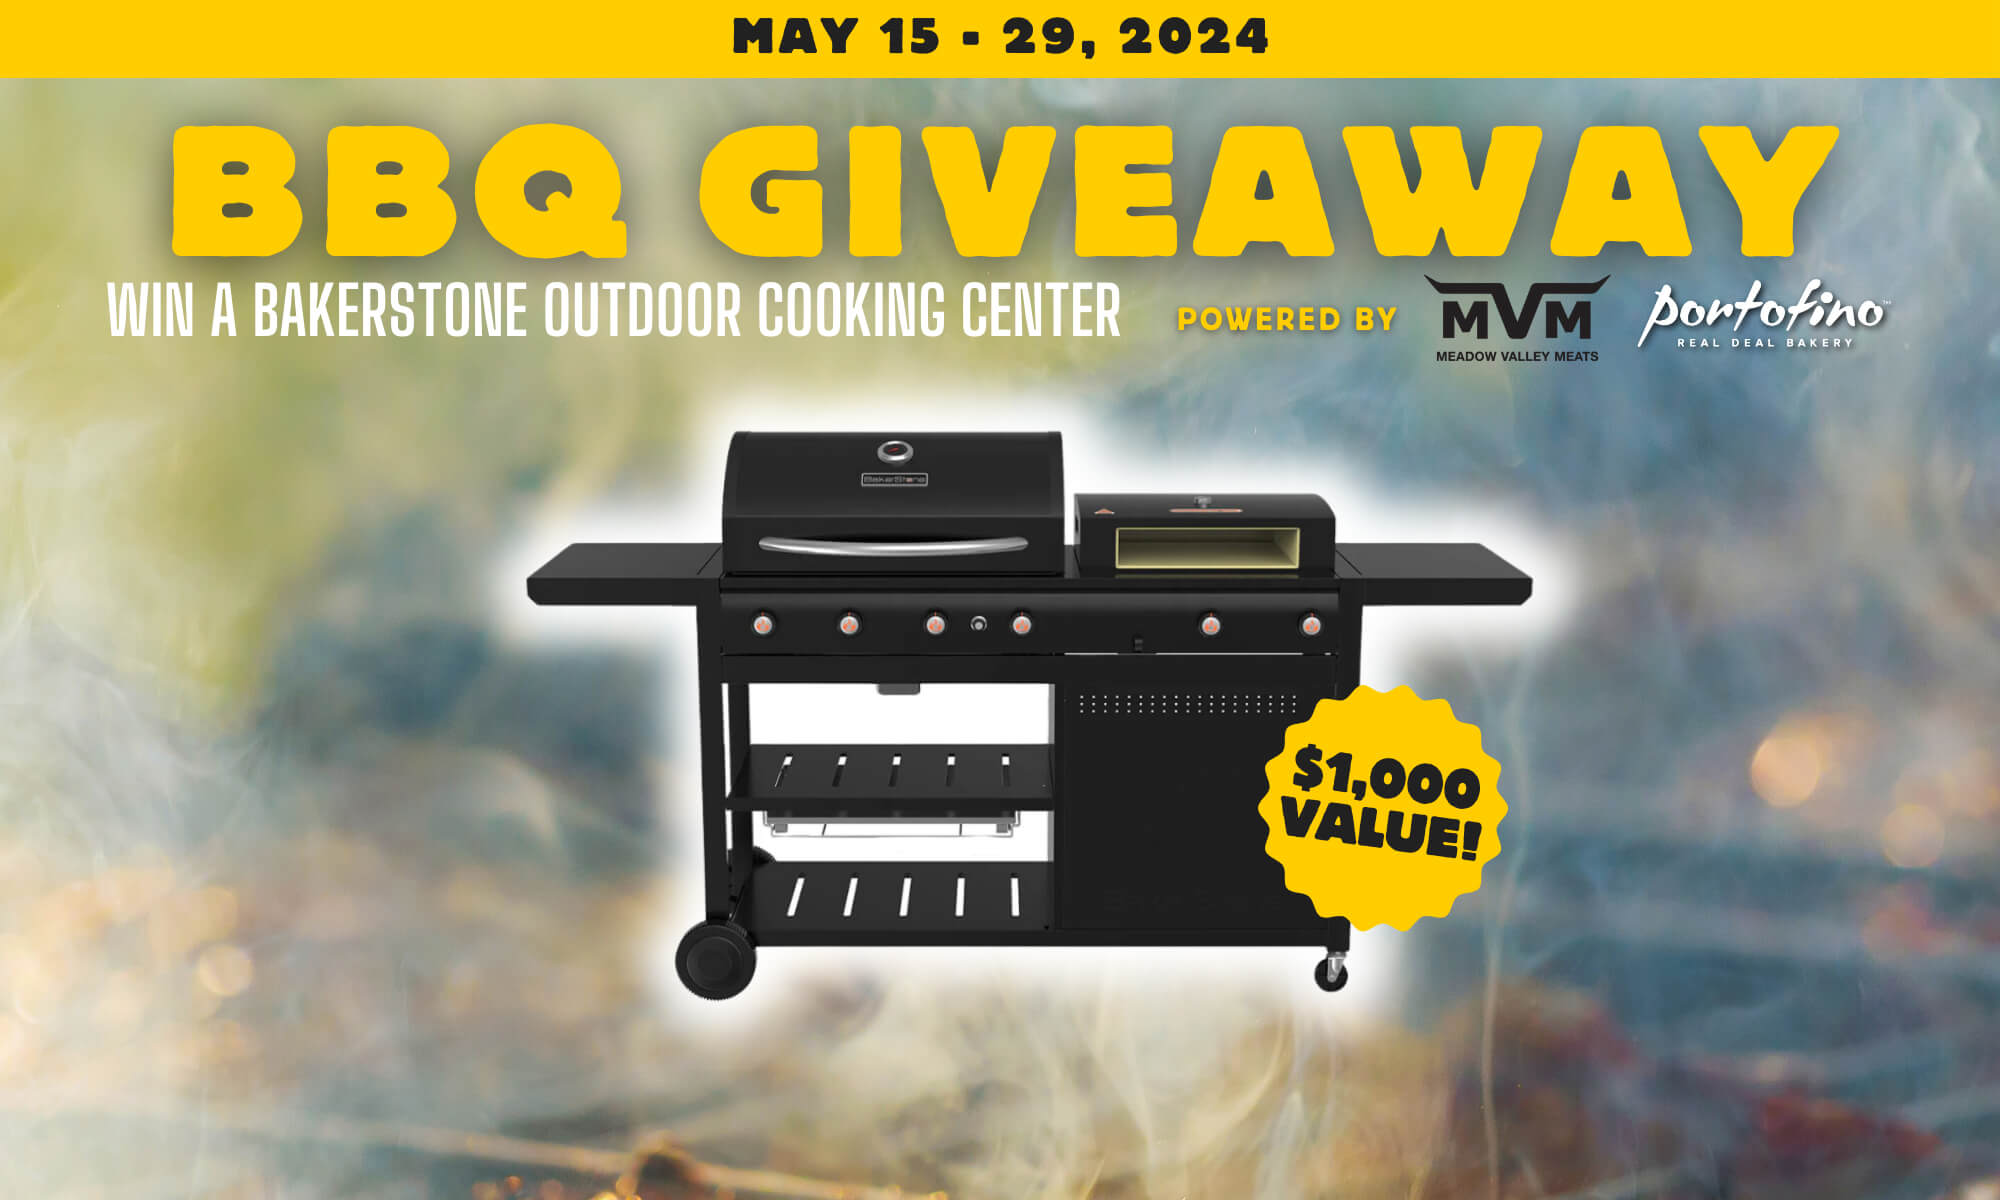 We're giving away a BBQ! Enter to win a Bakerstone Outdoor Cooking System!